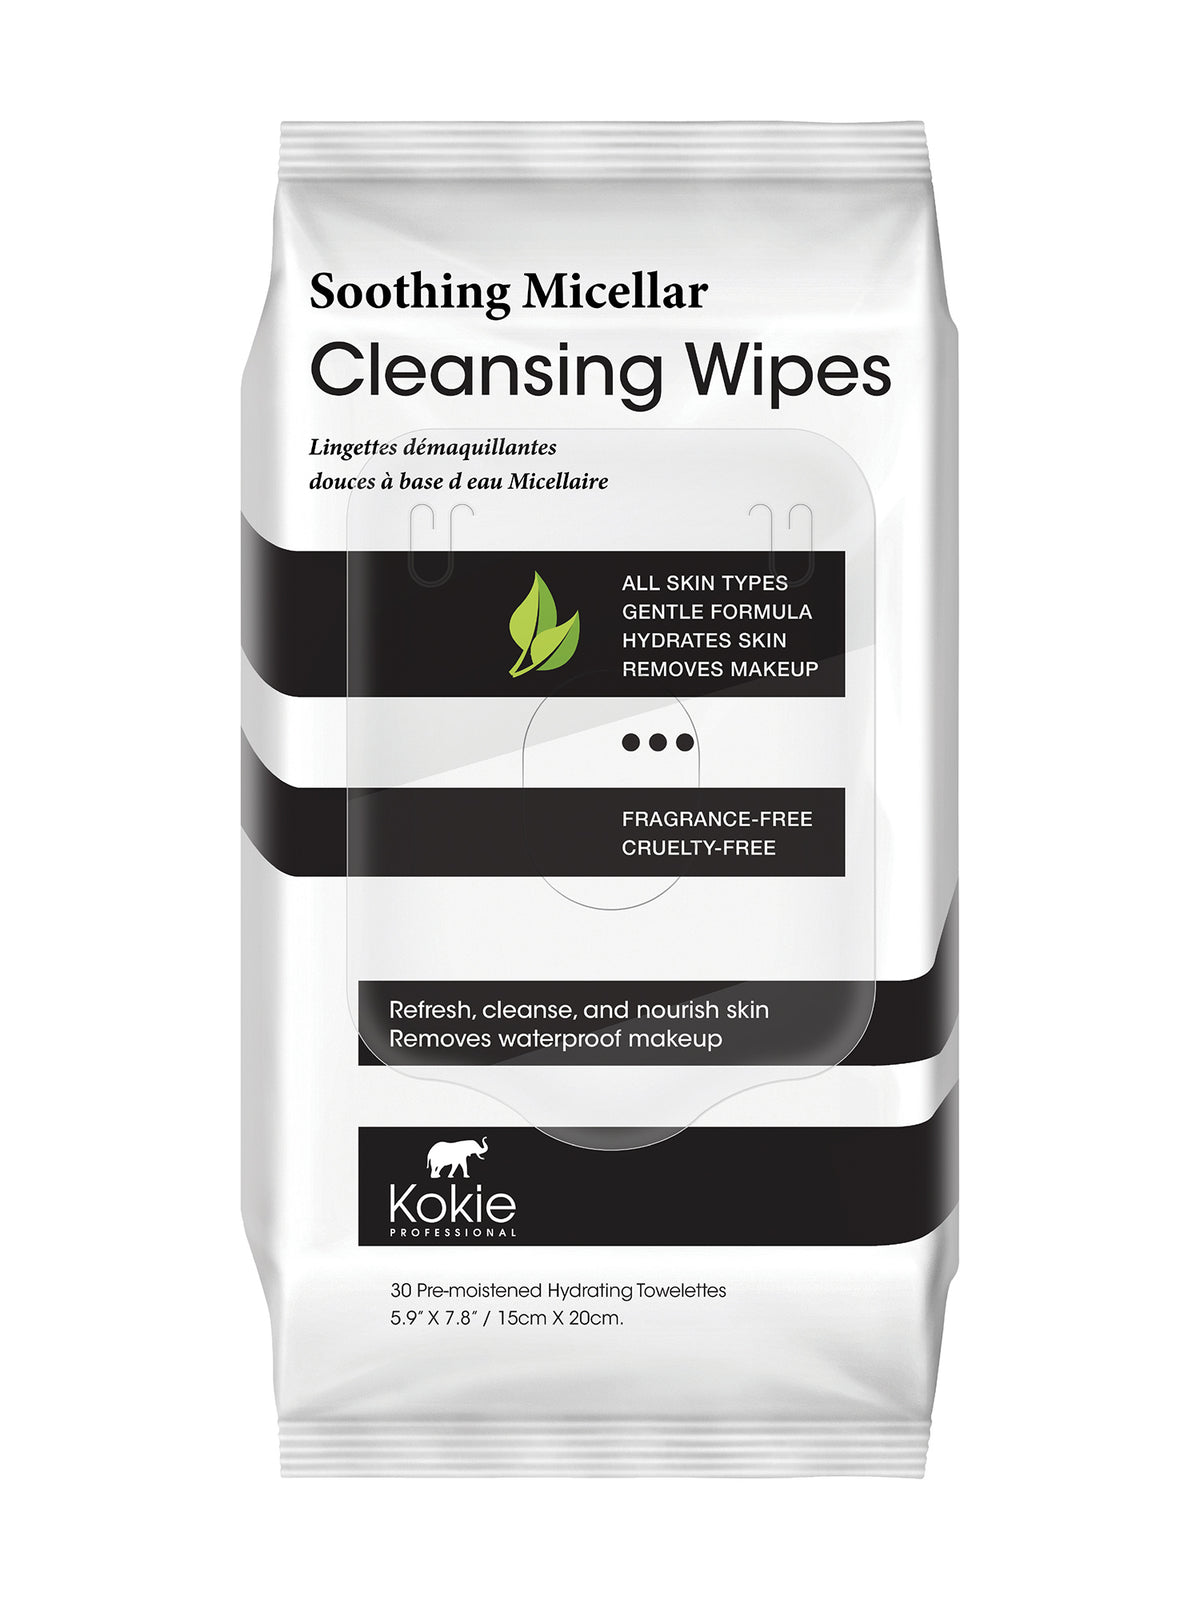 SOOTHING MICELLAR CLEANSING WIPES